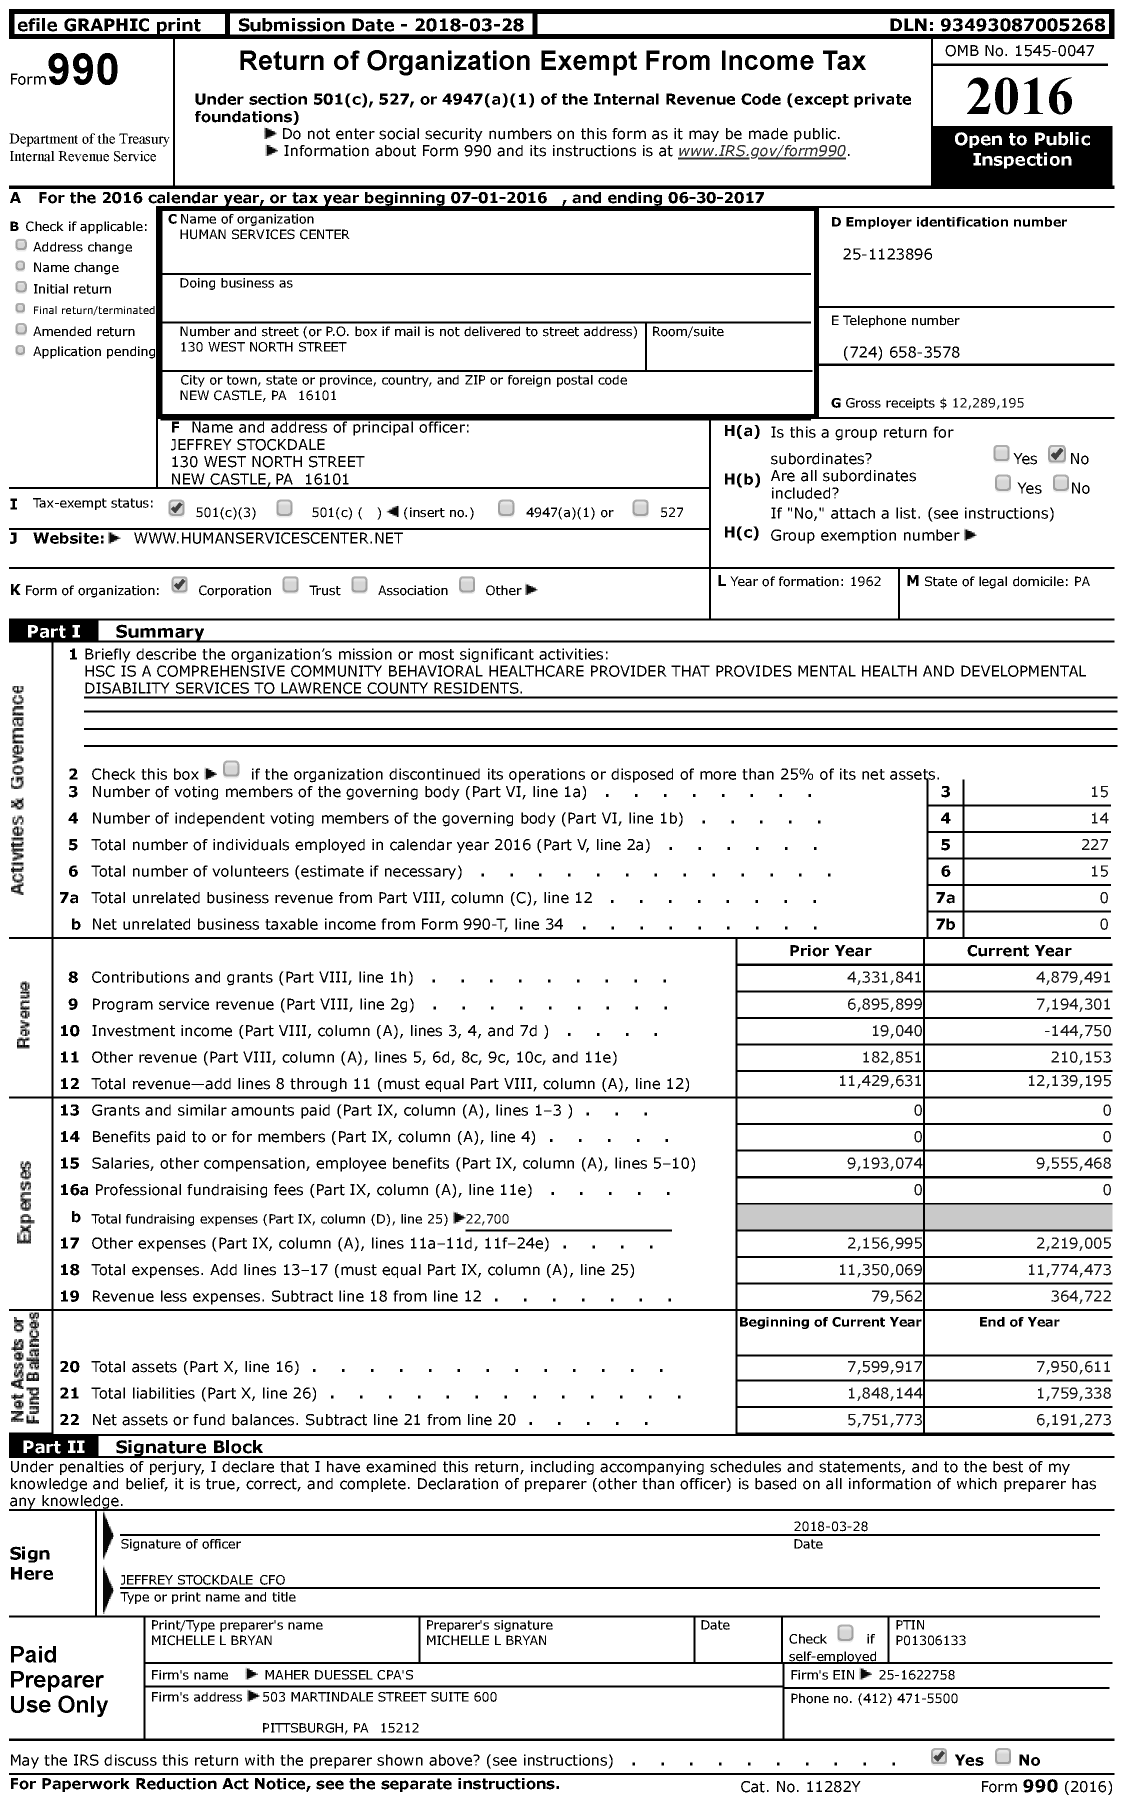 Image of first page of 2016 Form 990 for Human Services Center (HSC)